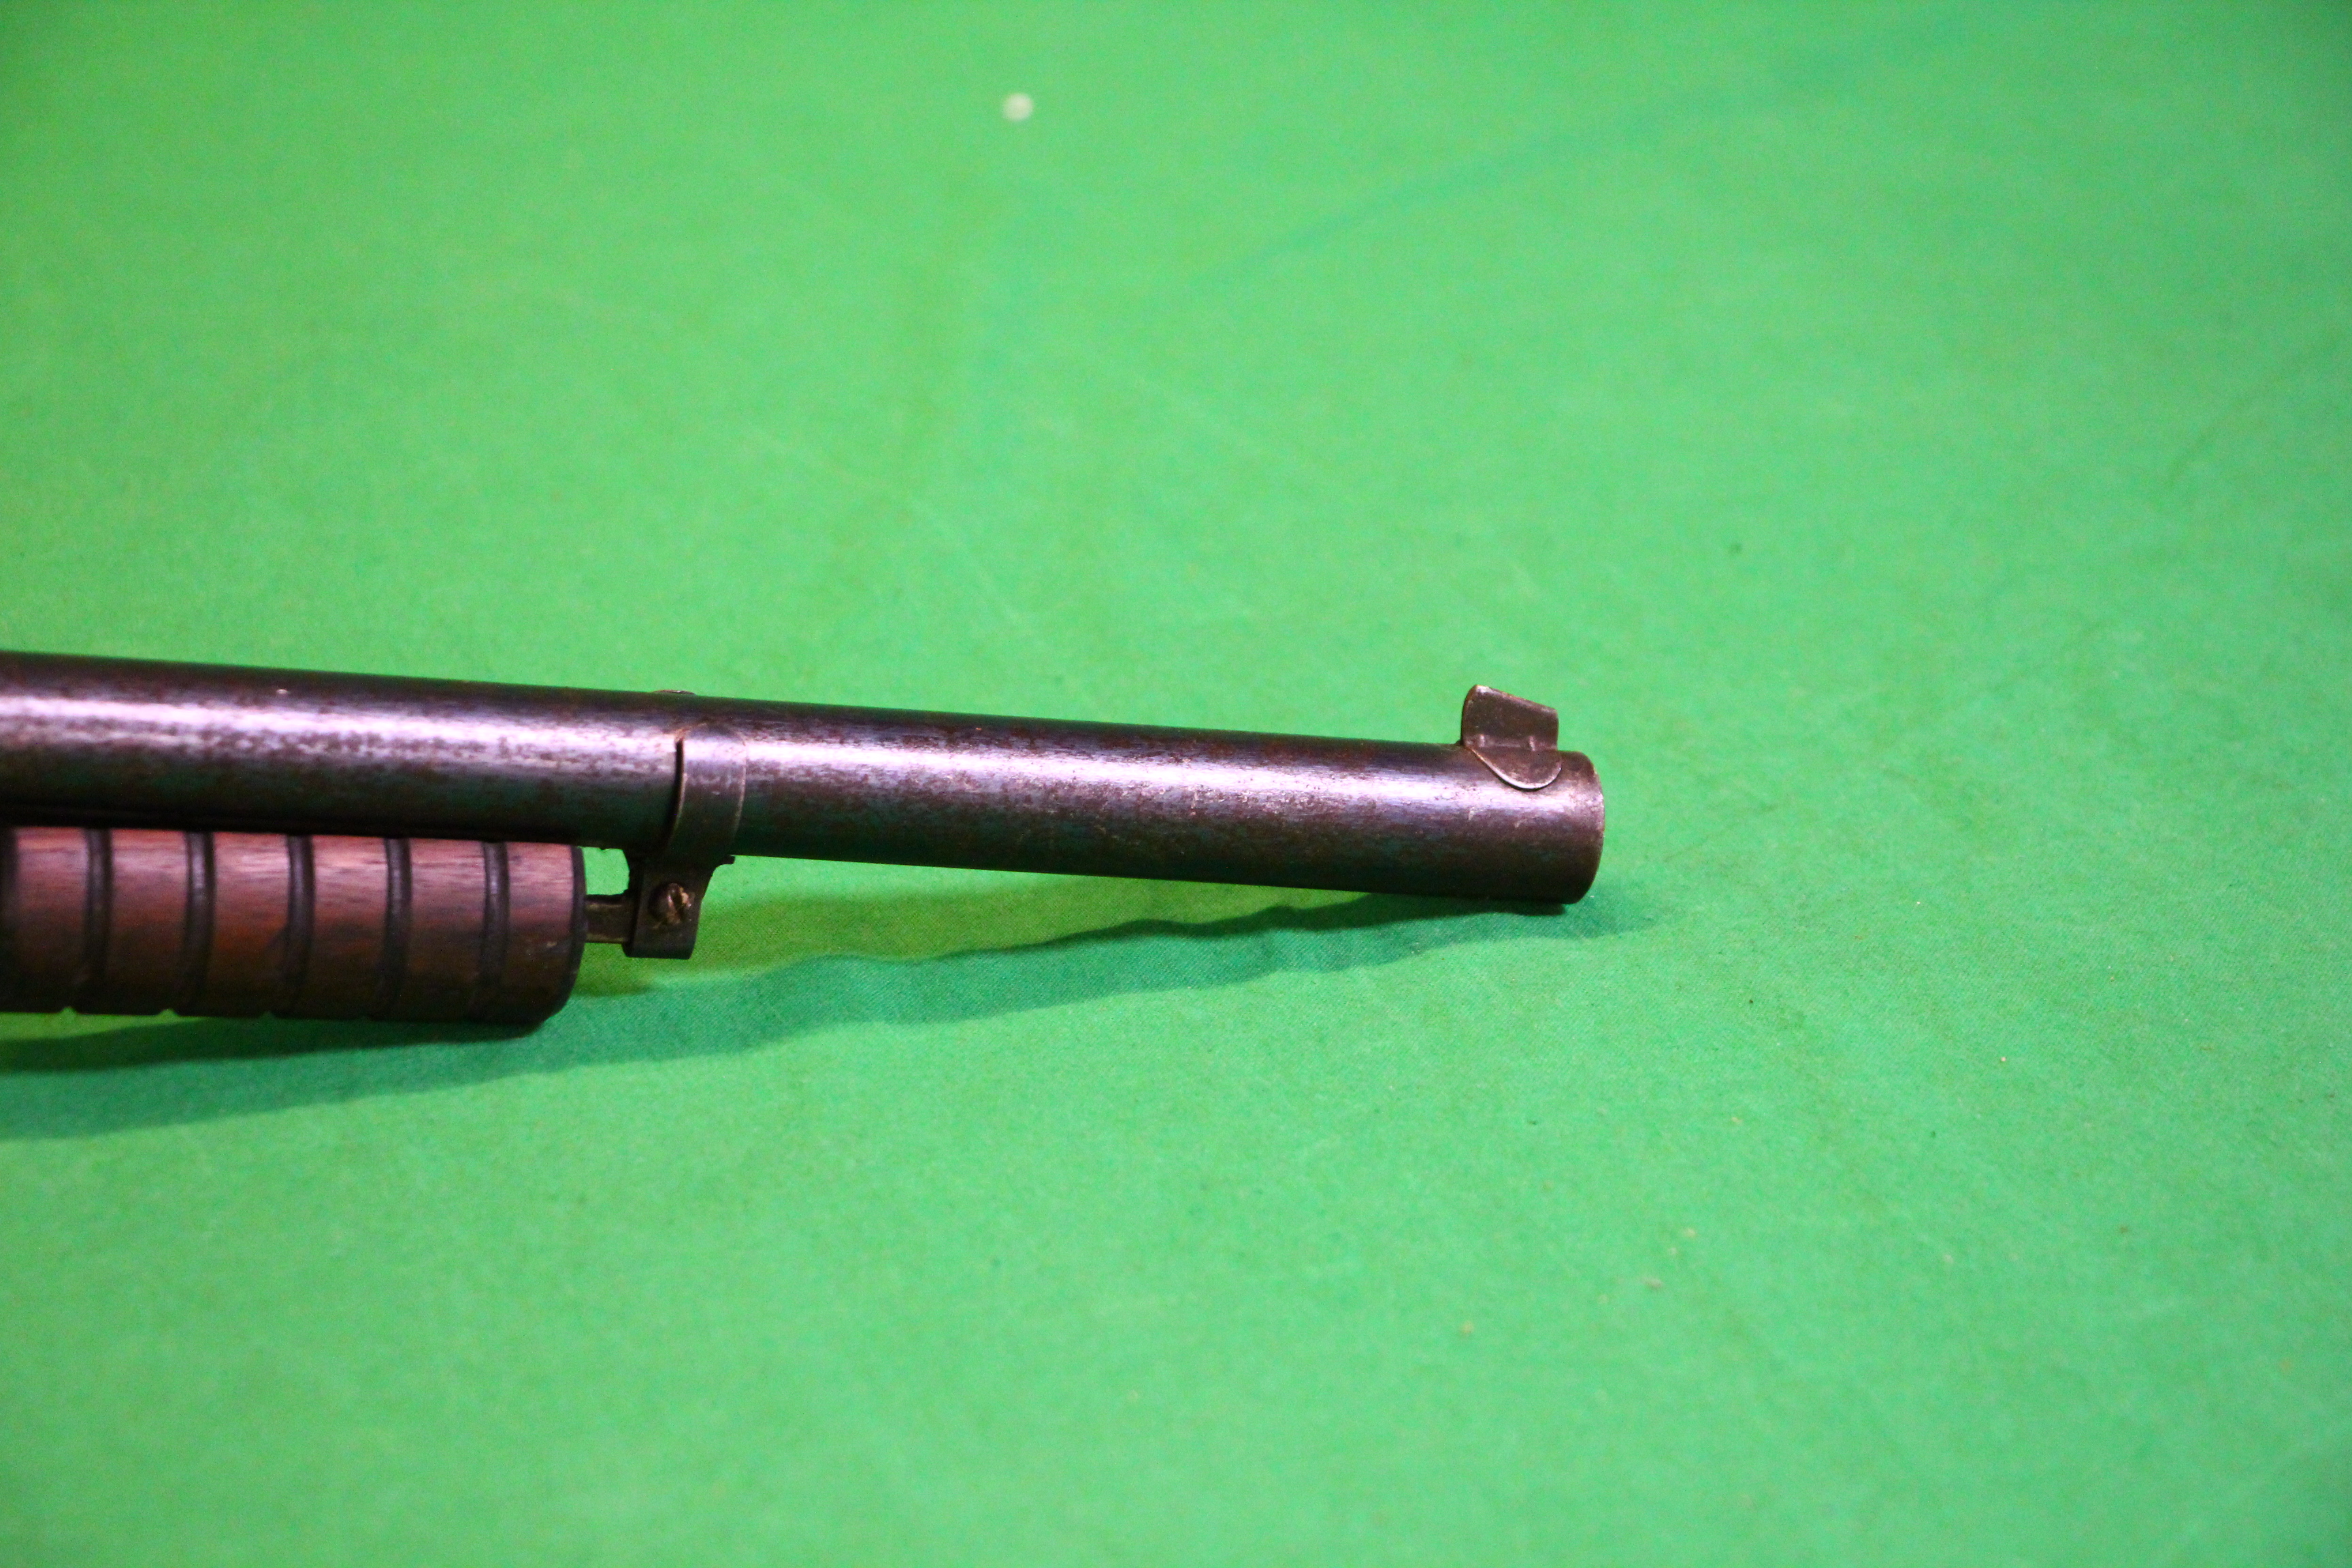 A DAISY MODEL 25 PUMP ACTION AIR GUN - (ALL GUNS TO BE INSPECTED AND SERVICED BY QUALIFIED GUNSMITH - Image 5 of 8